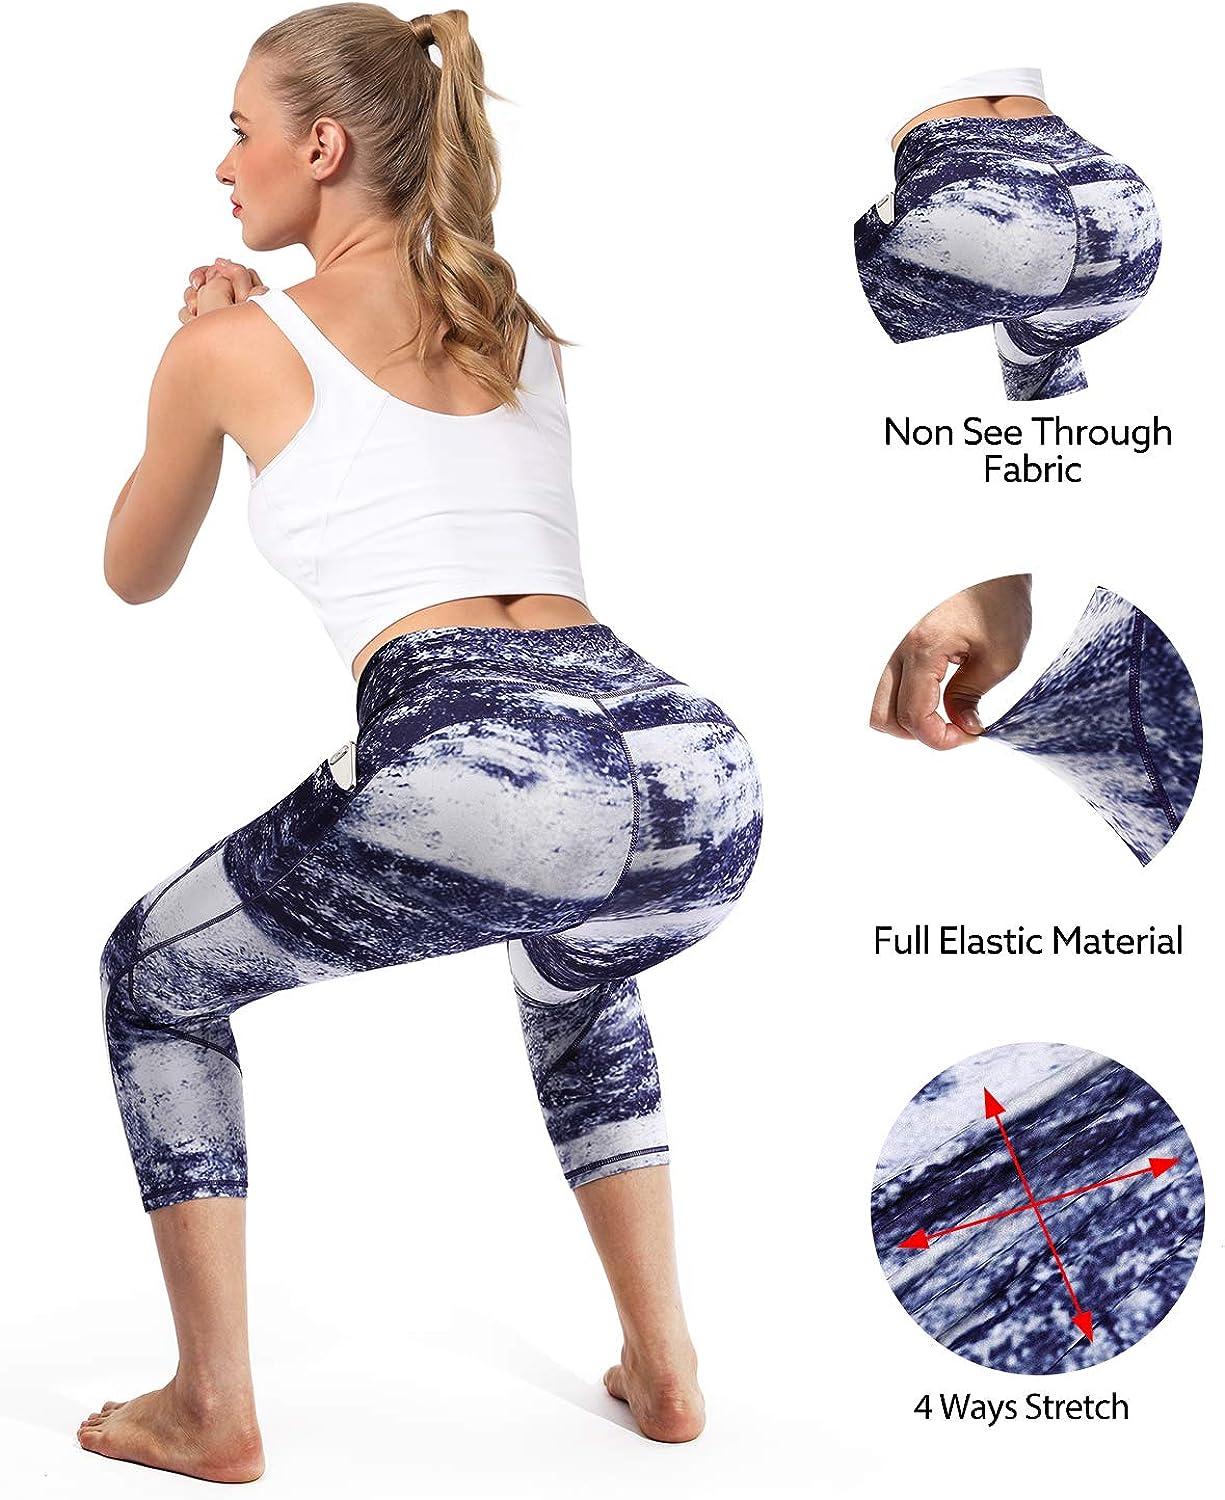 Womens White Leggings Workout Leggings / White Yoga Pants With Sports Style  Print Perfect for Running, Jogging, Crossfit Non See Through 